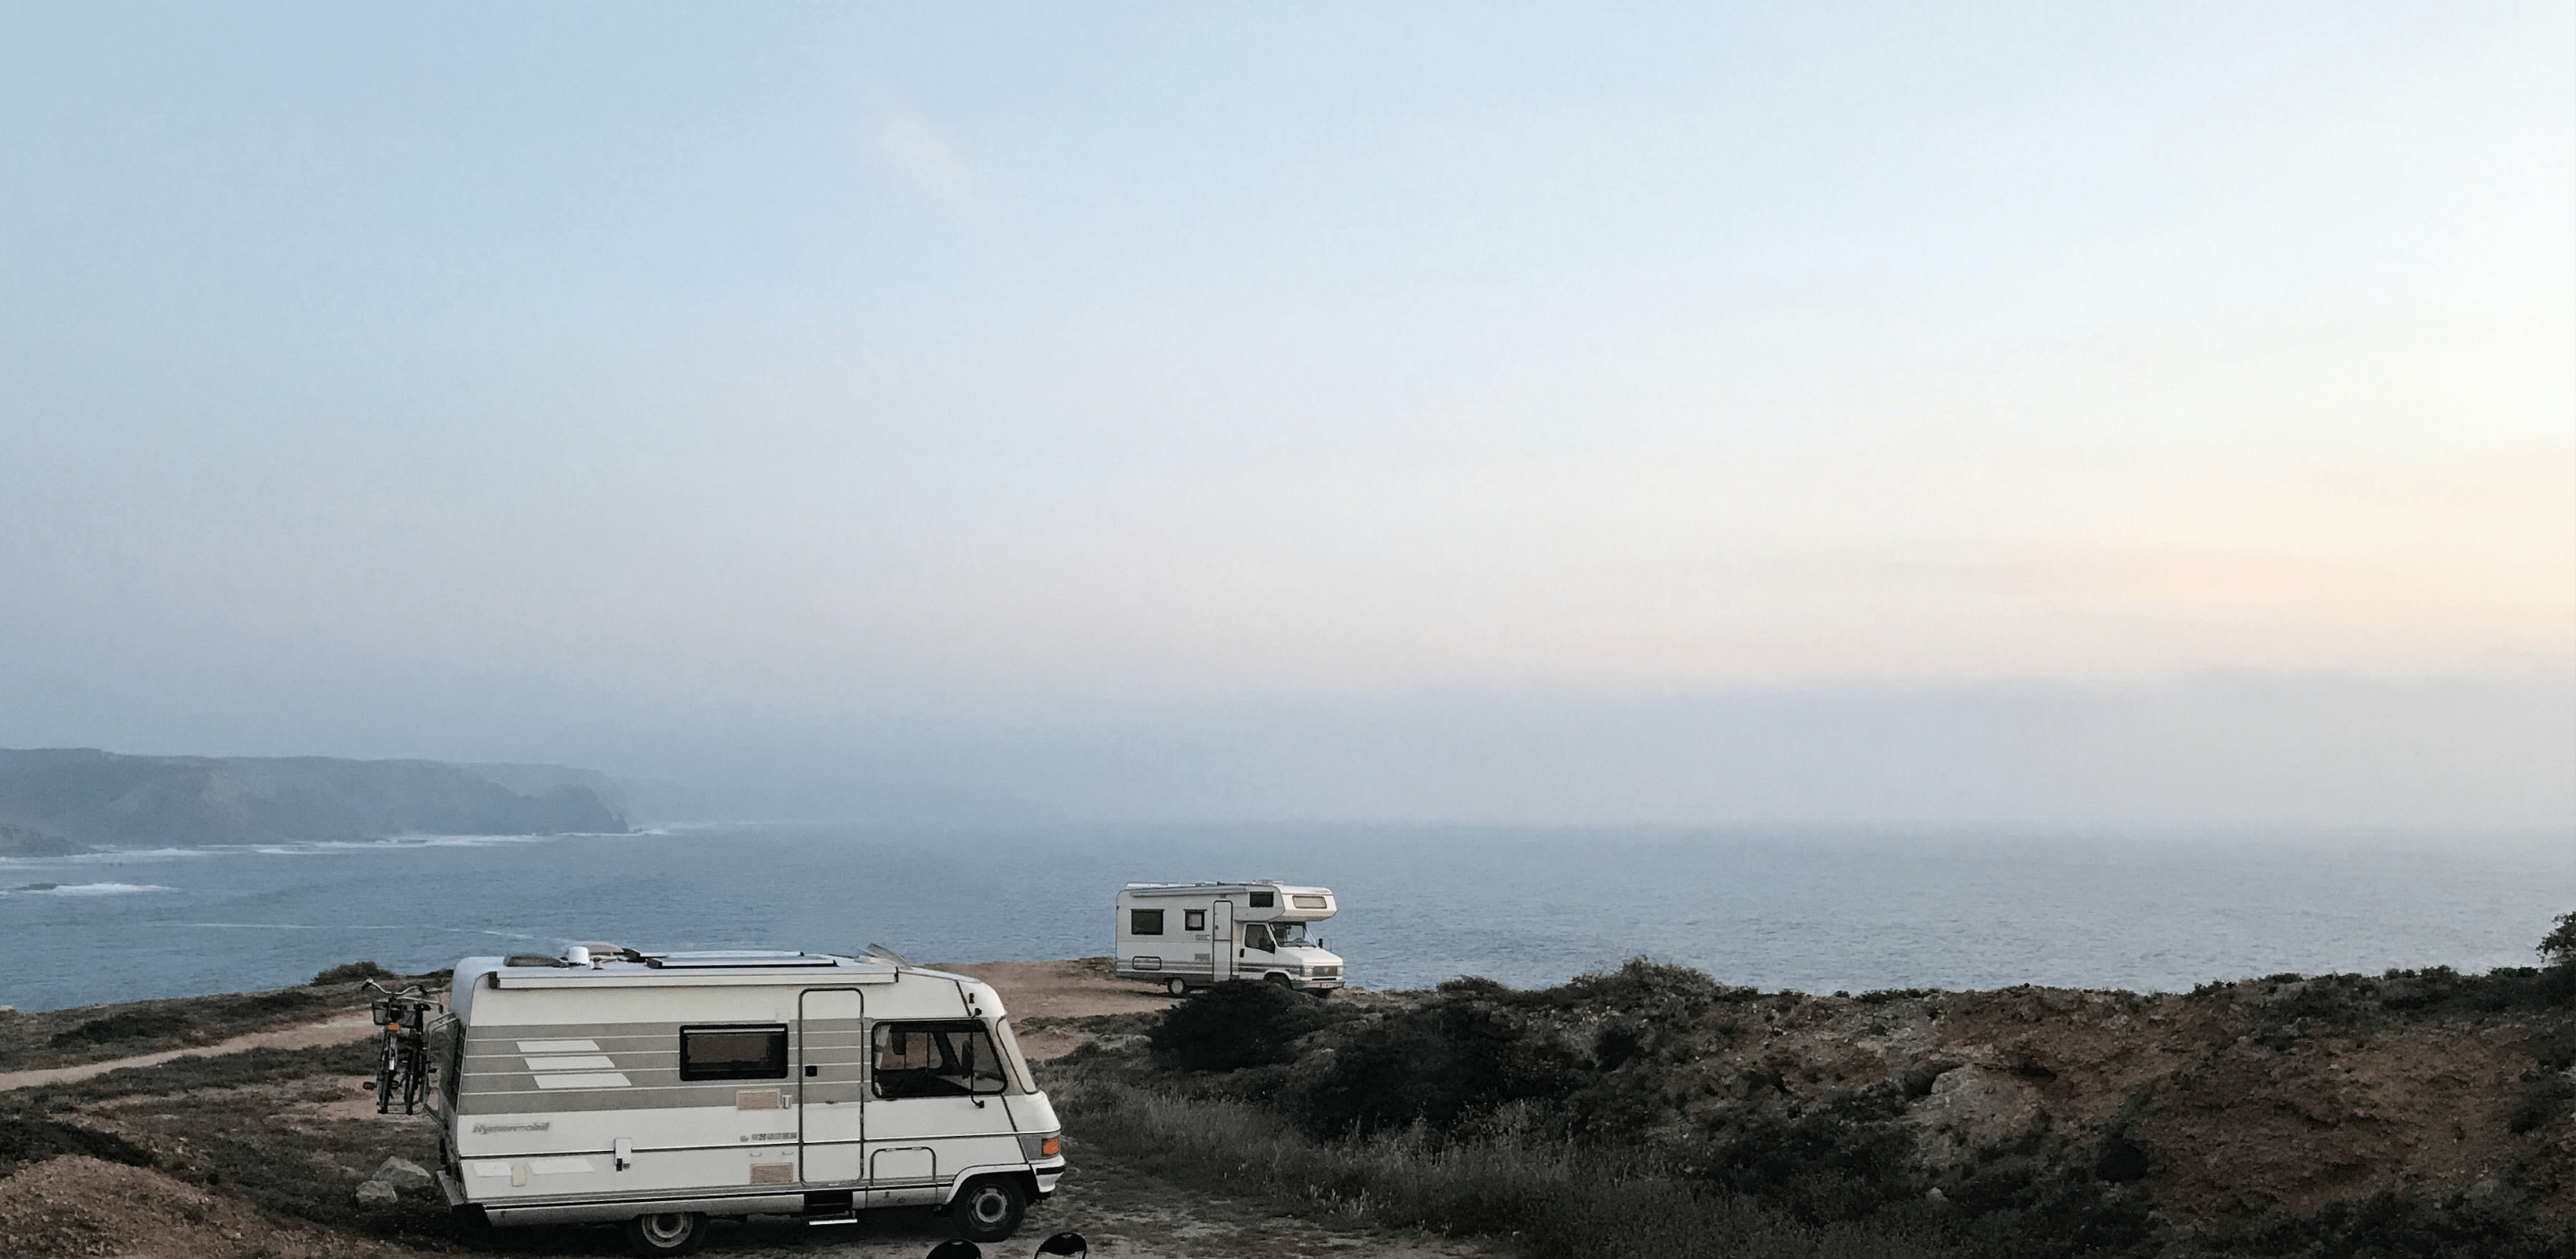 scenic image of a campervan